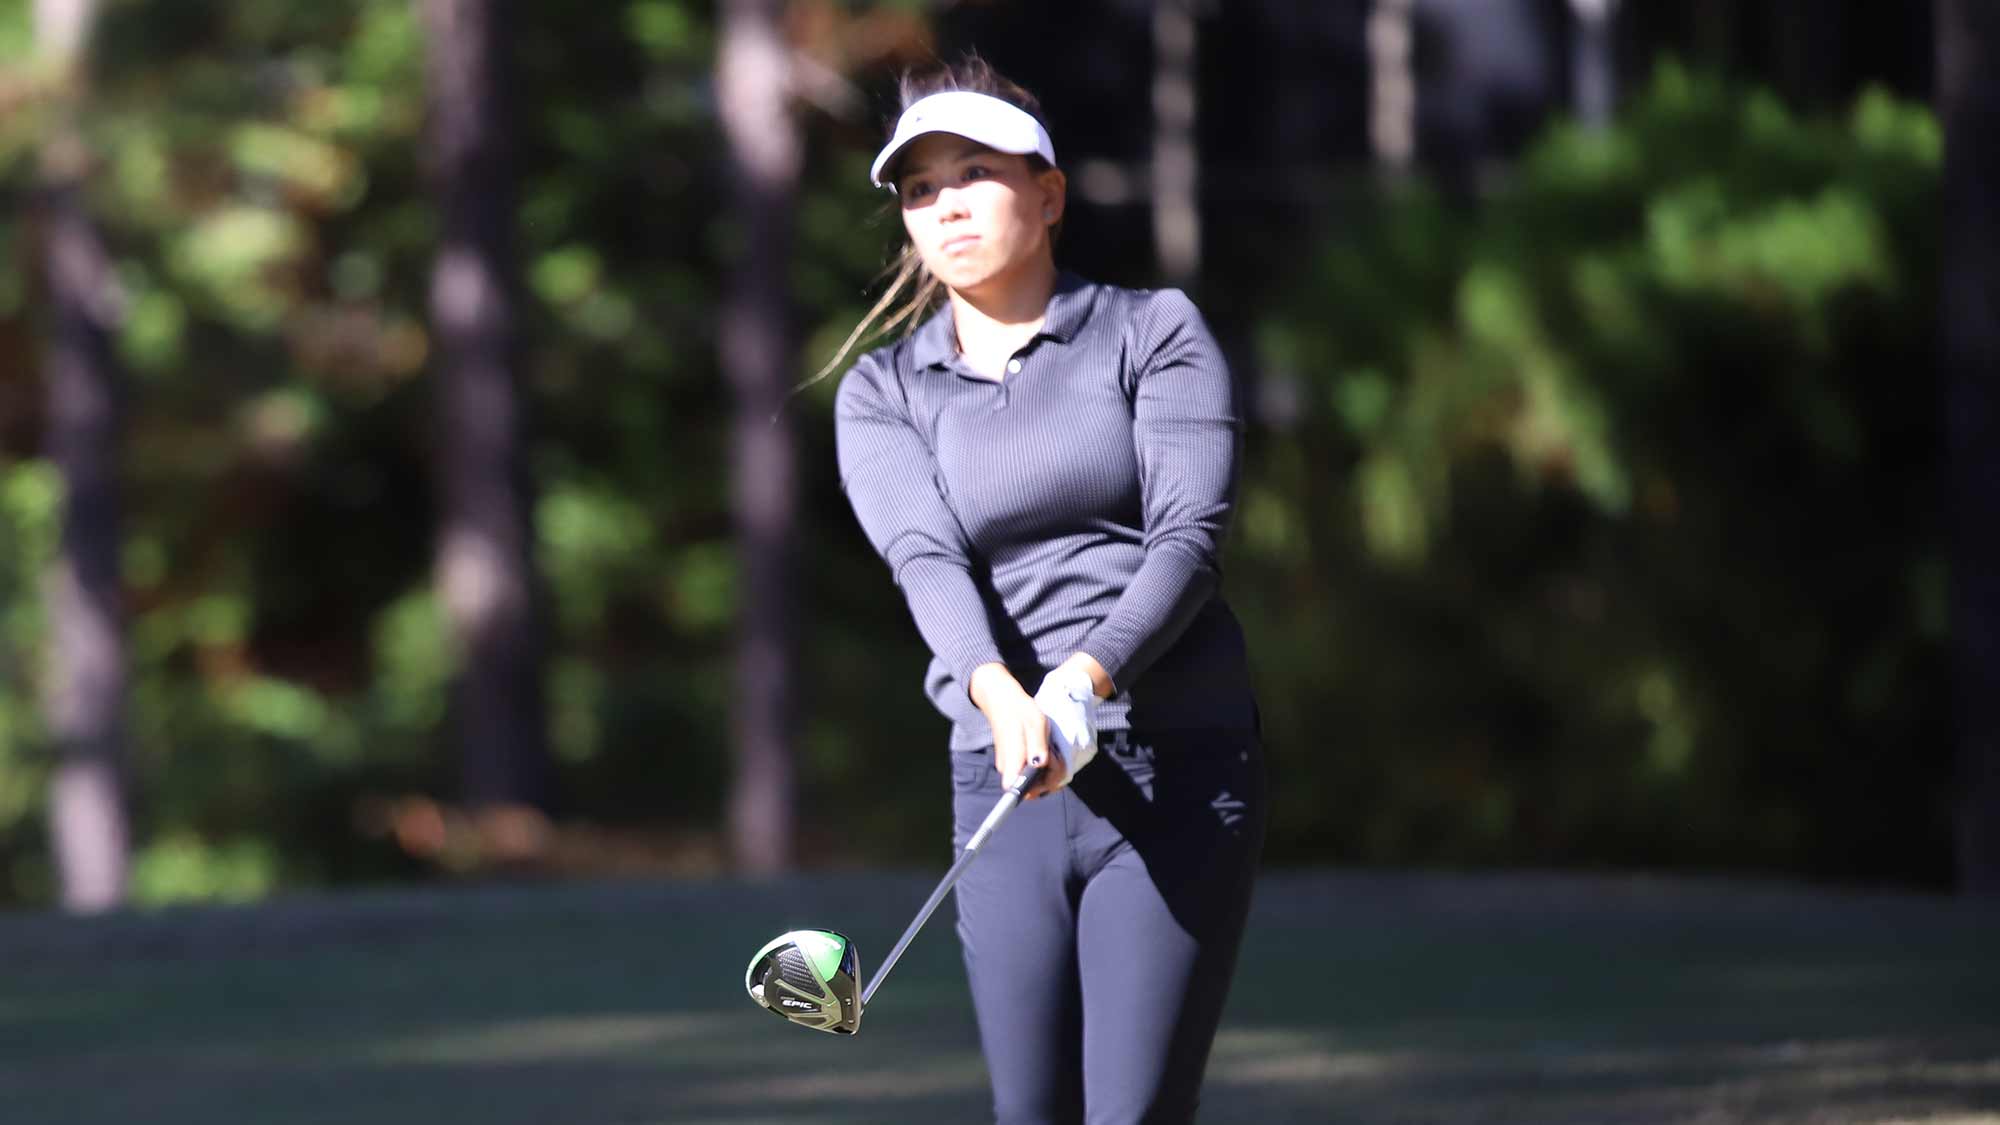 Brianna Do watches her tee shot during the second round of the 2019 LPGA Q-Series at Pinehurst Resort